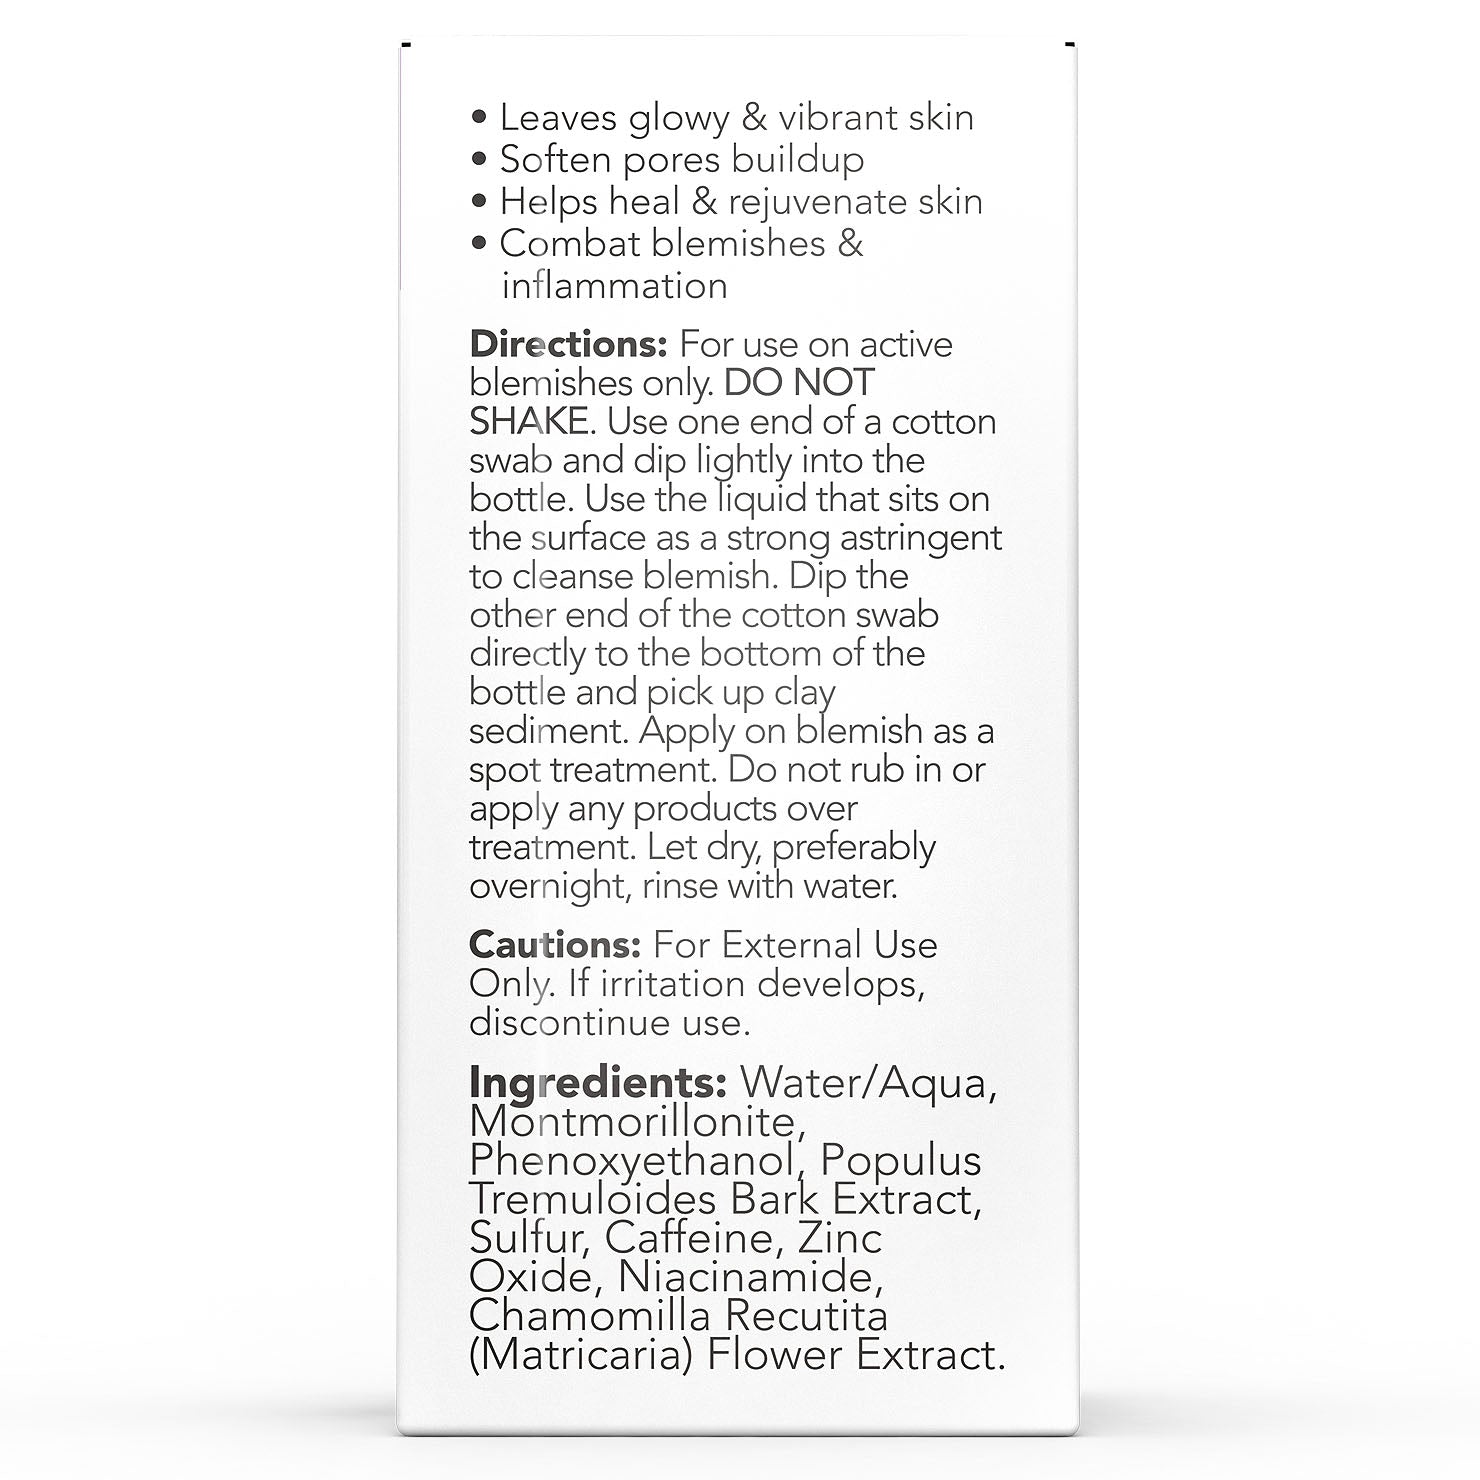 Product description of Spa Sciences' Acne Attack Bundle on a white background.